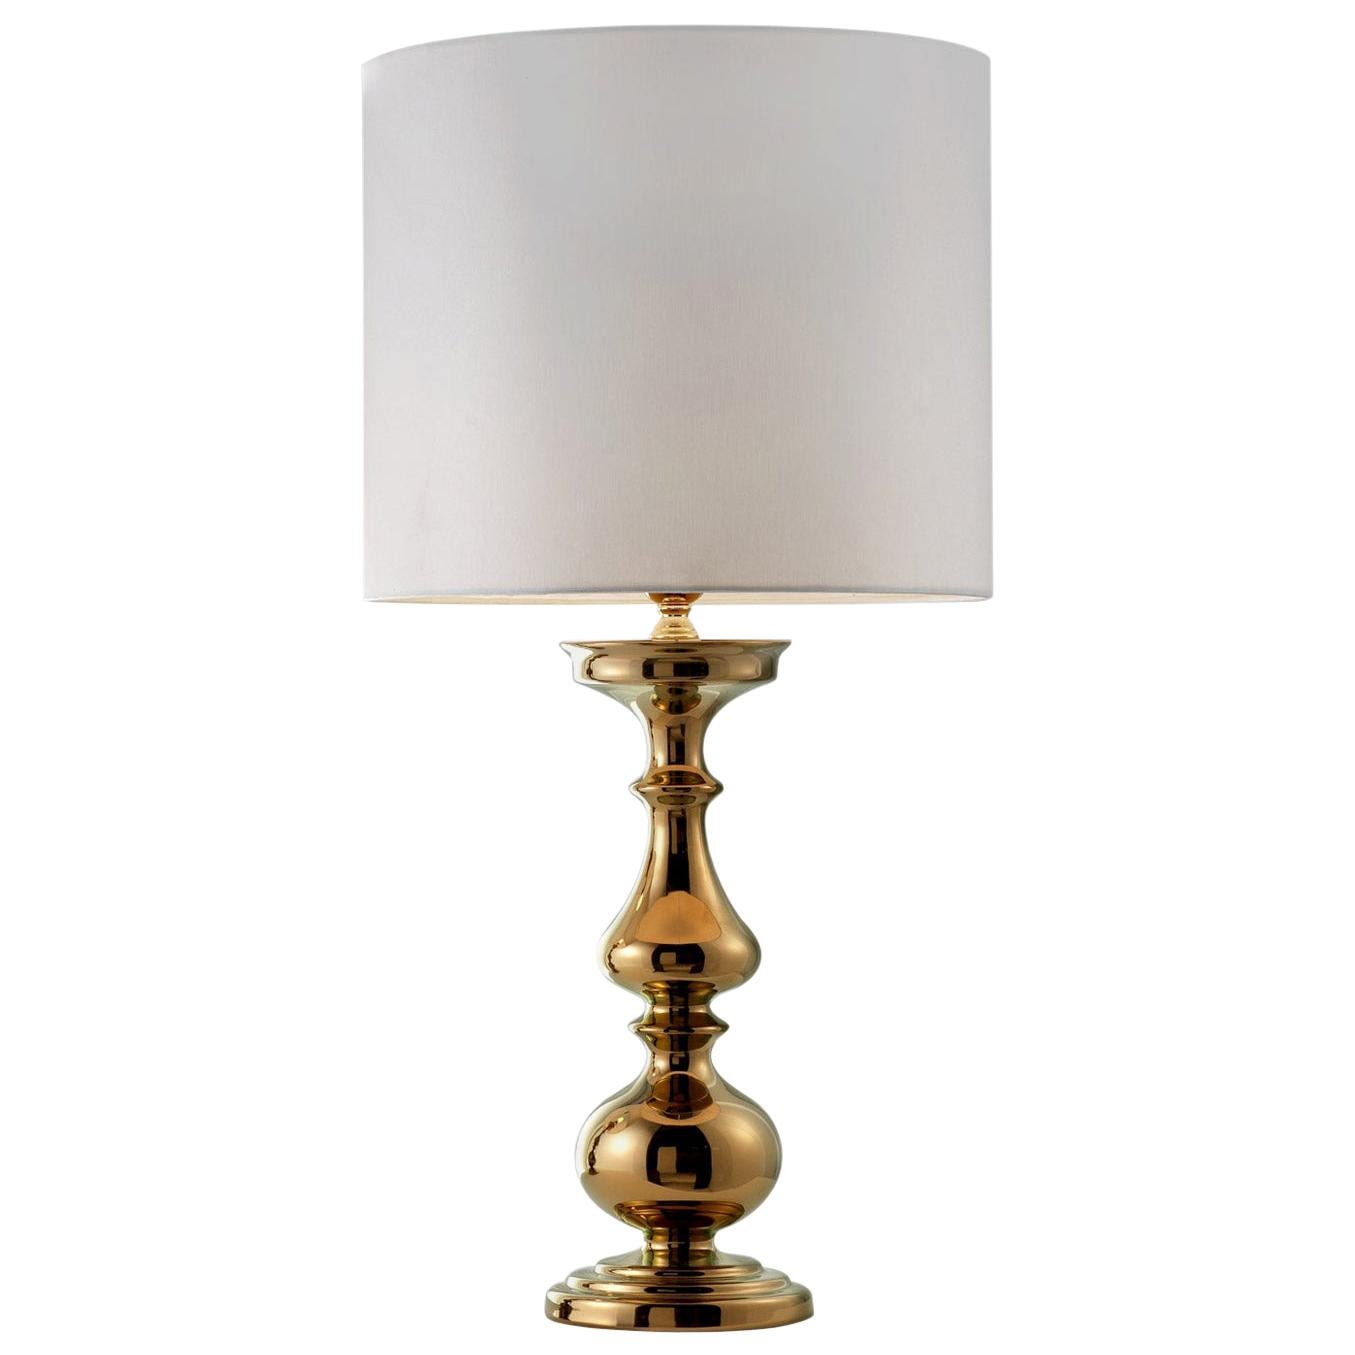 Ceramic Table Lamp "ABHA" Handcrafted in Bronze by Gabriella B., Made in Italy For Sale